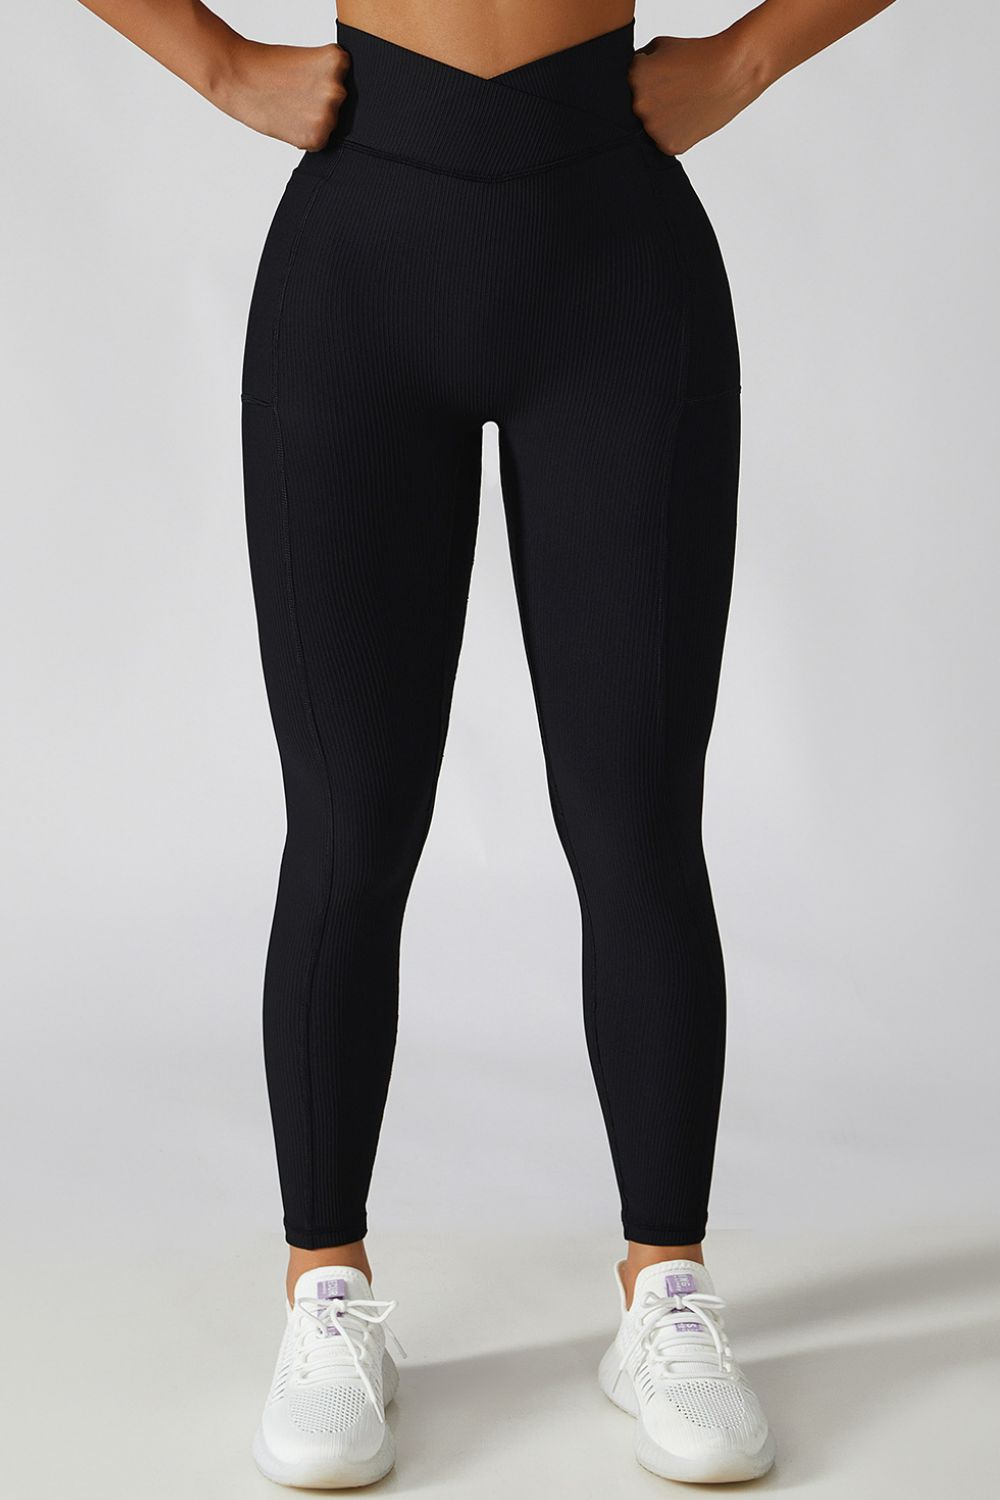 *9 Colors* Snatch O' Clock Crossover Waist Active Ribbed Leggings - Pet Hair Resistant